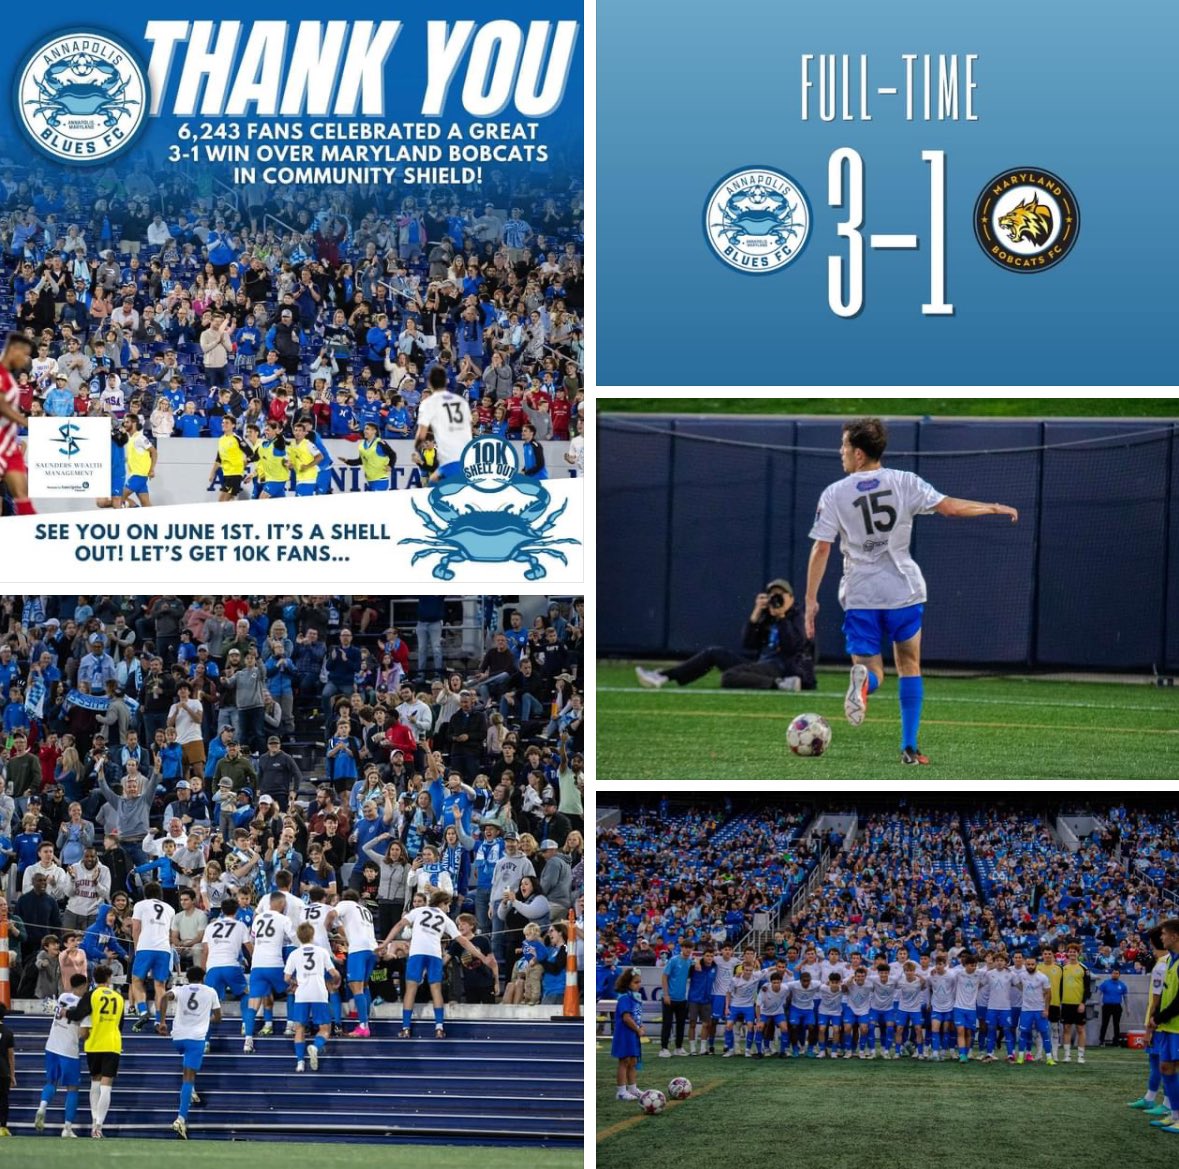 Special night in Annapolis… Annapolis Blues had 6,243 fans for Community Shield (annual pre-szn game). They beat strong 3rd Division pro team Maryland Bobcats in final Pre-Season game while selling lots of merchandise & raising money for 4 local charities. The Beautiful Game!!!